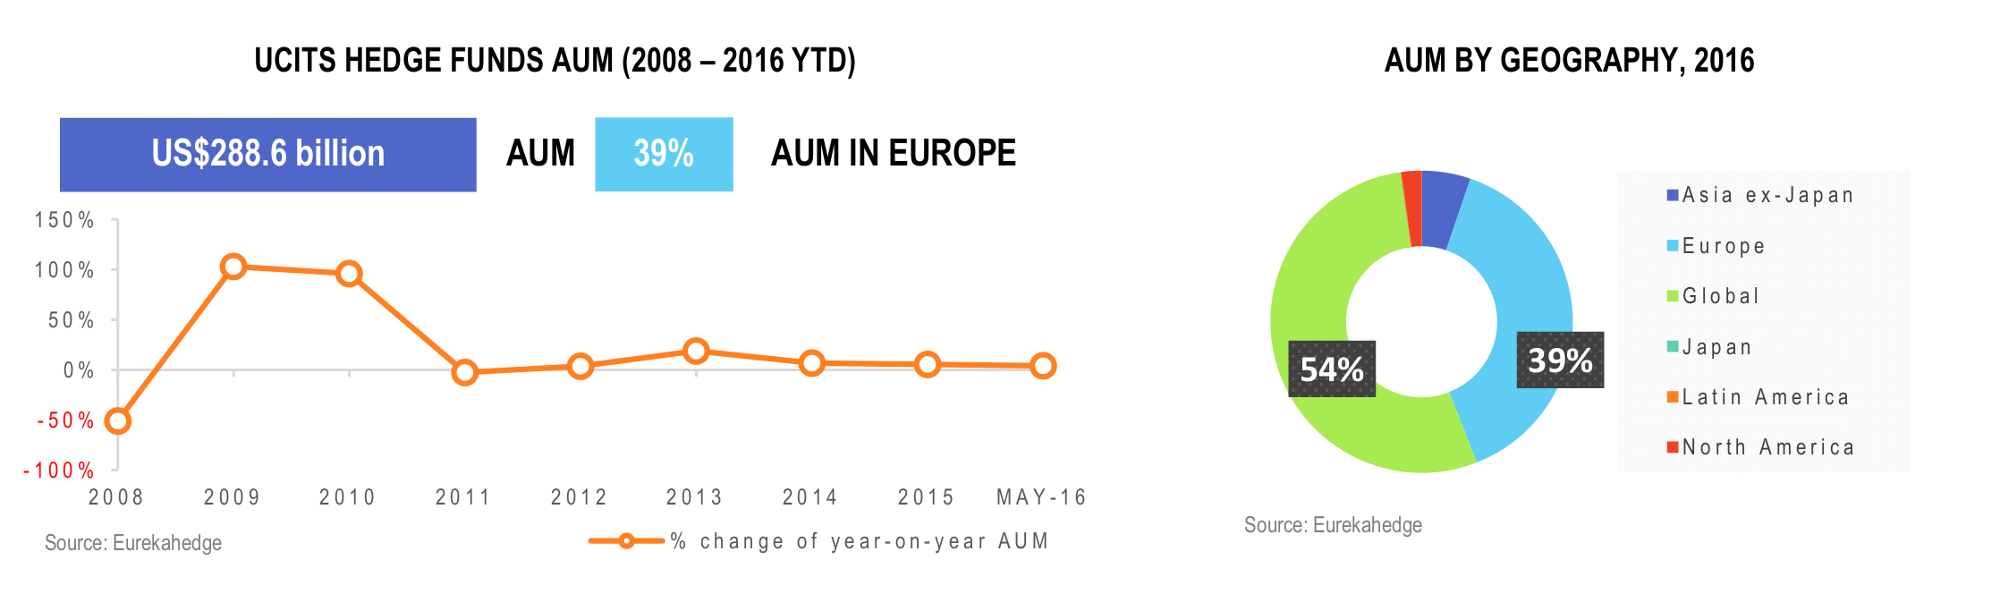 UCITS Hedge Funds Infographic July 2016 - Total regional AUM and number of funds